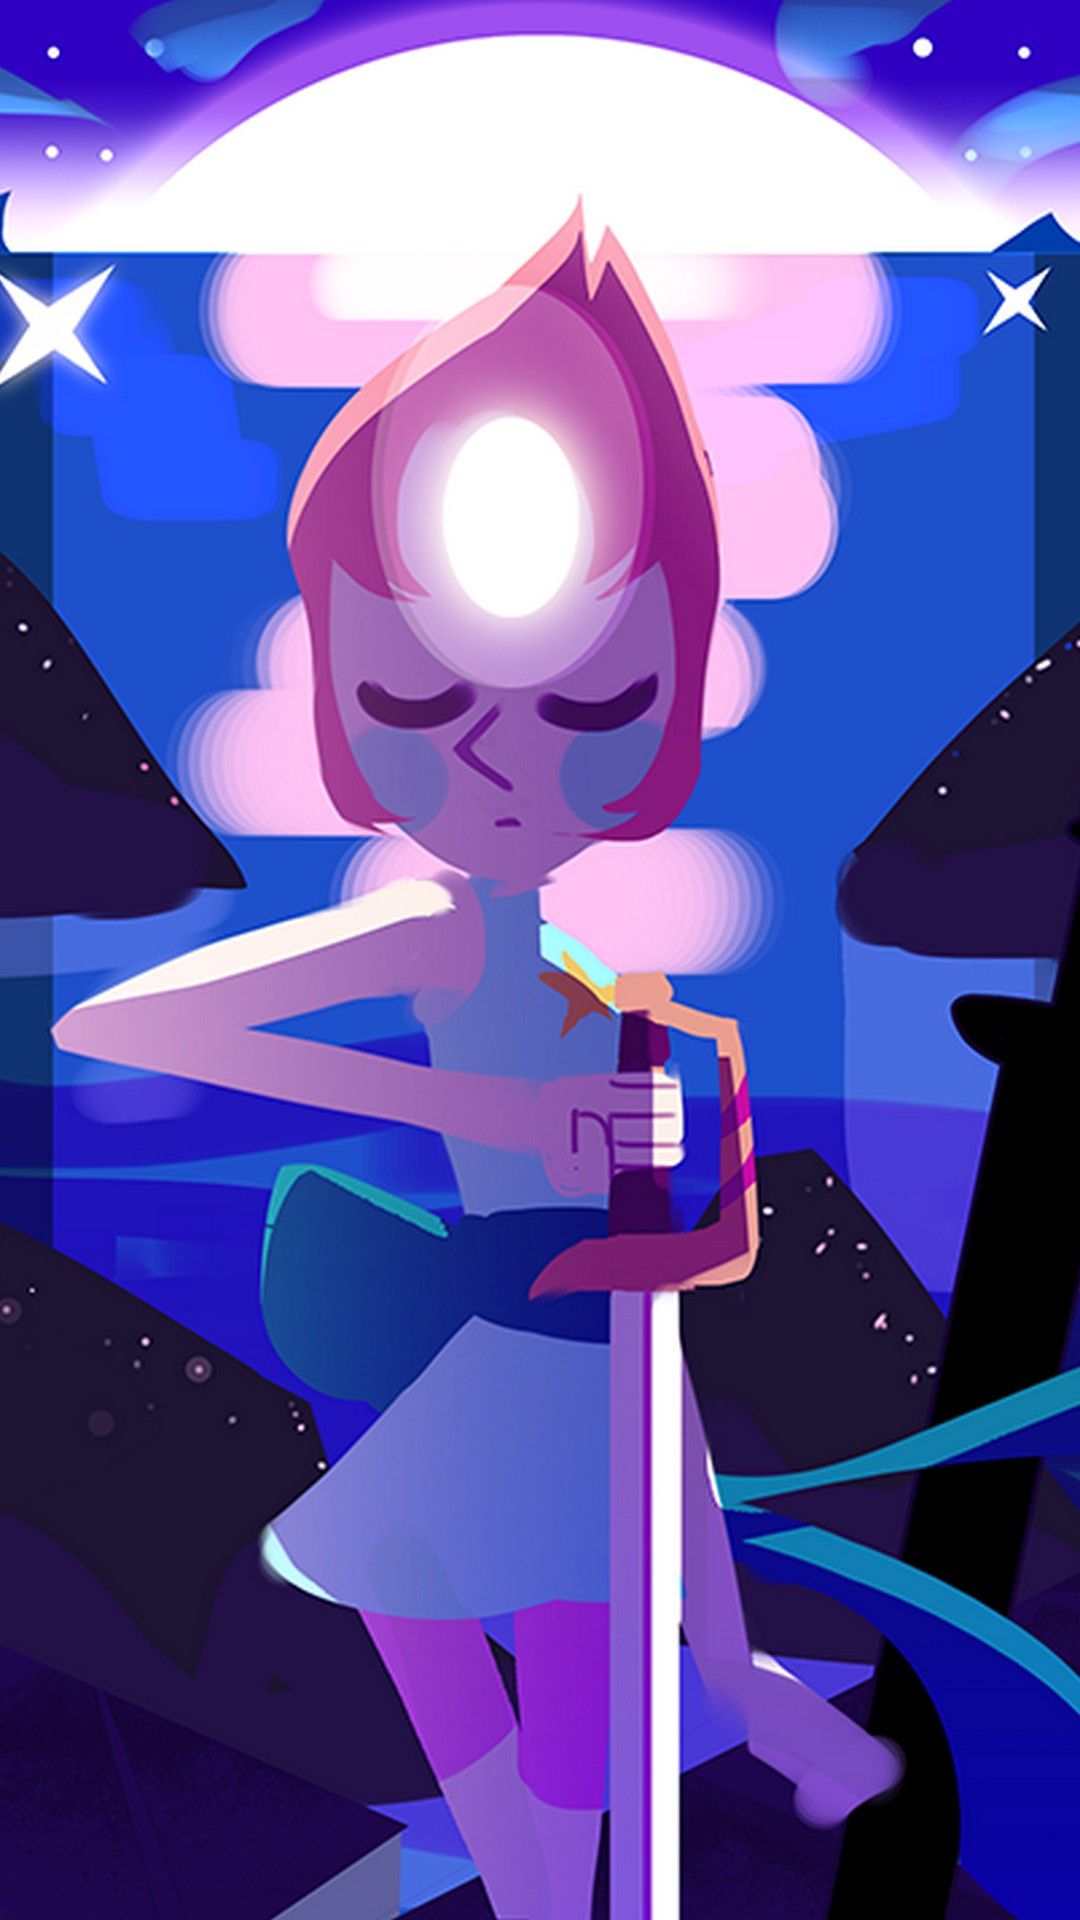 Android Wallpaper HD Steven Universe Android Wallpaper